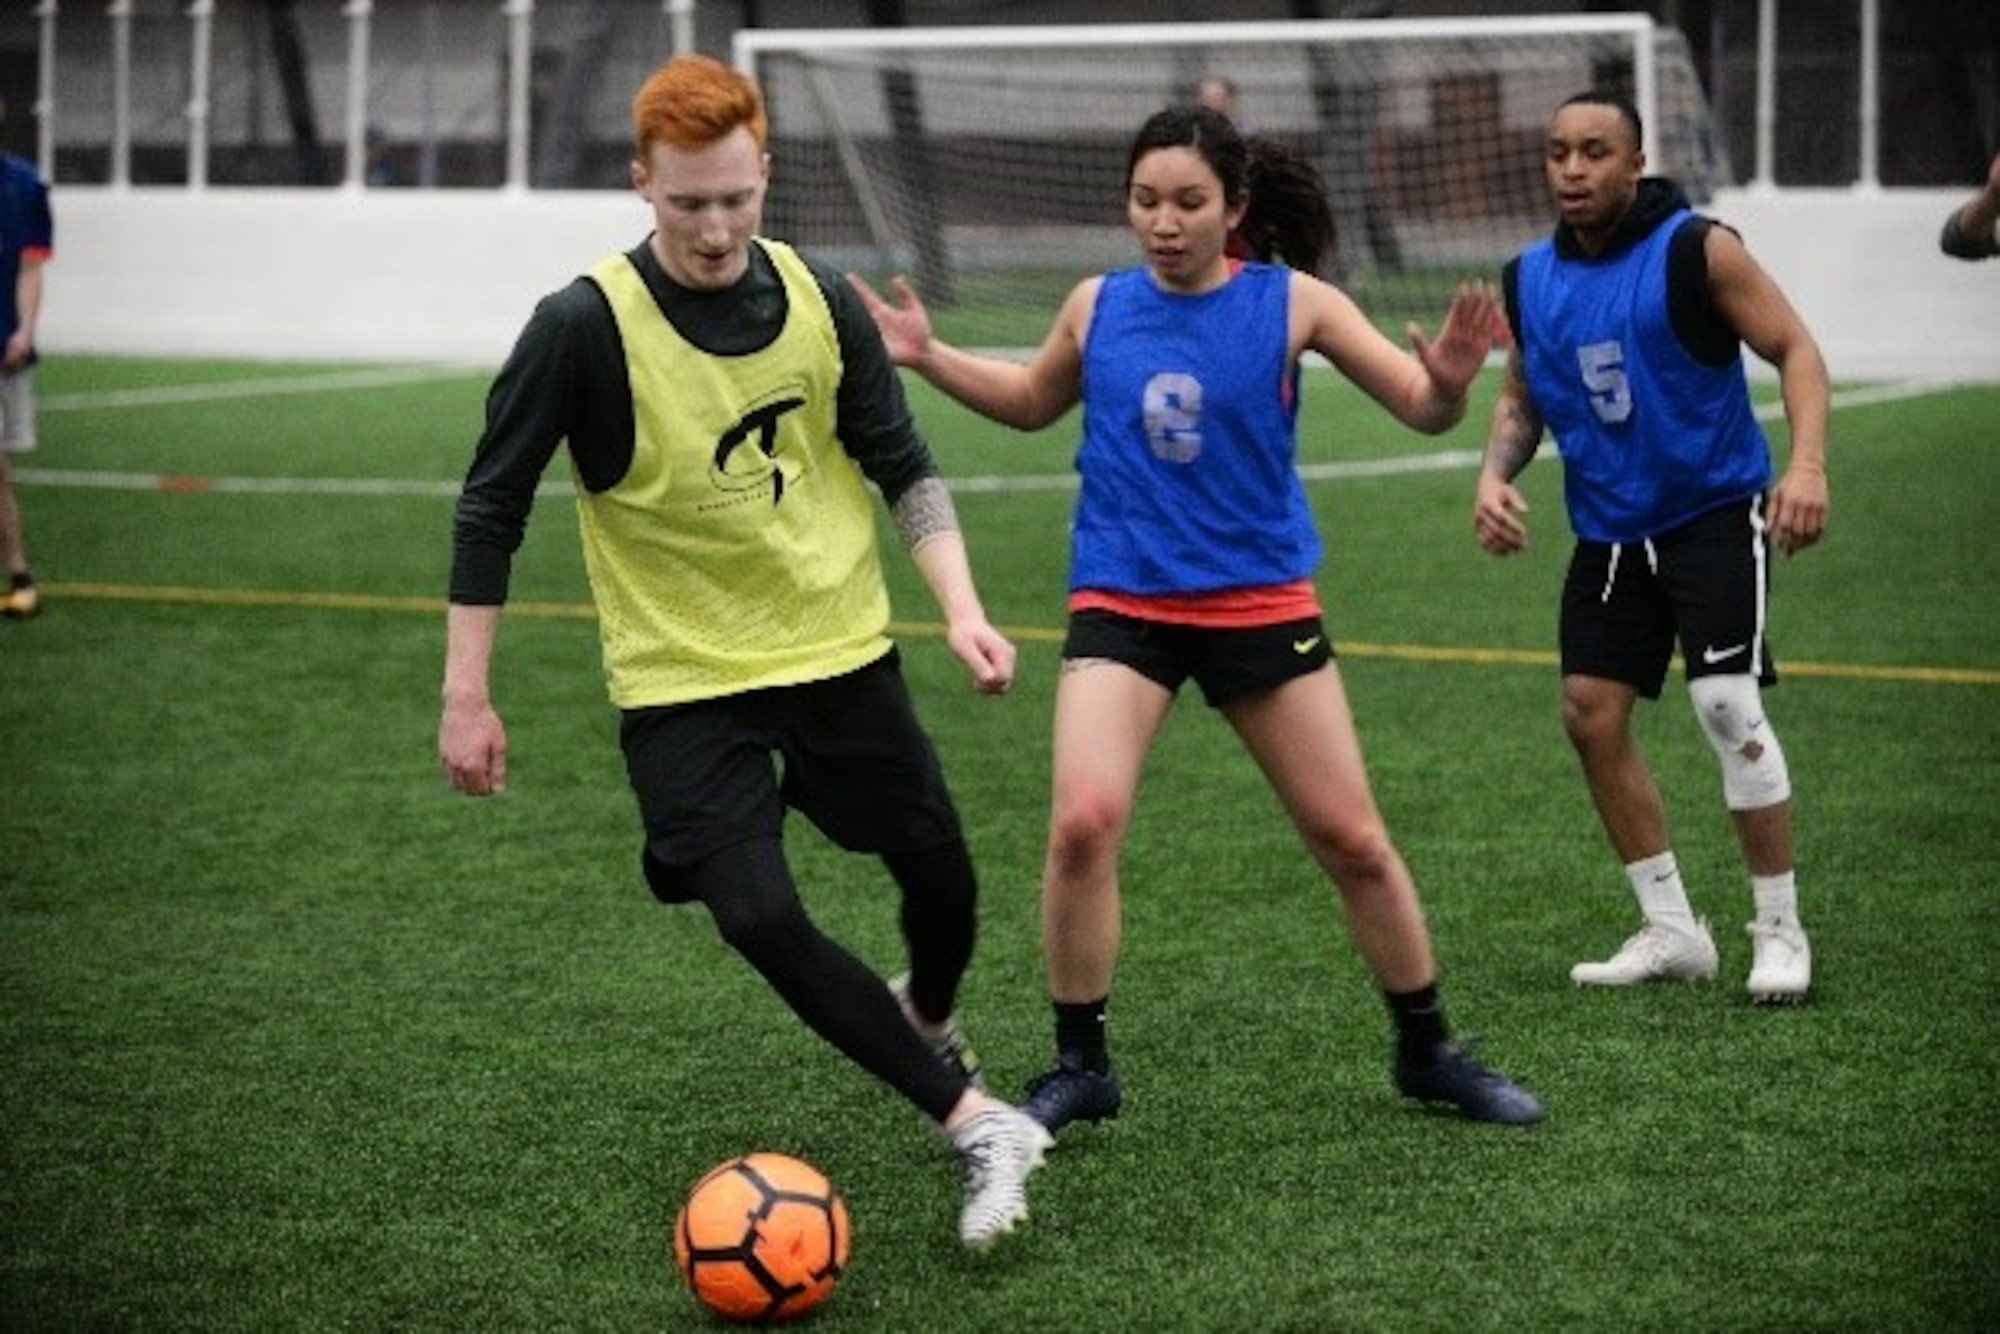 Airman 1st Class Rylee Boyd-jablonski, left, a 28th Communication Squadron knowledge management technician, keeps a soccer ball away from defenders at Ellsworth Air Force Base, S.D., March 7, 2018. Intramural sports provide an outlet for Airmen to stay active and socialize with others around the base. (U.S. Air Force photo by Airman 1st Class Thomas Karol)